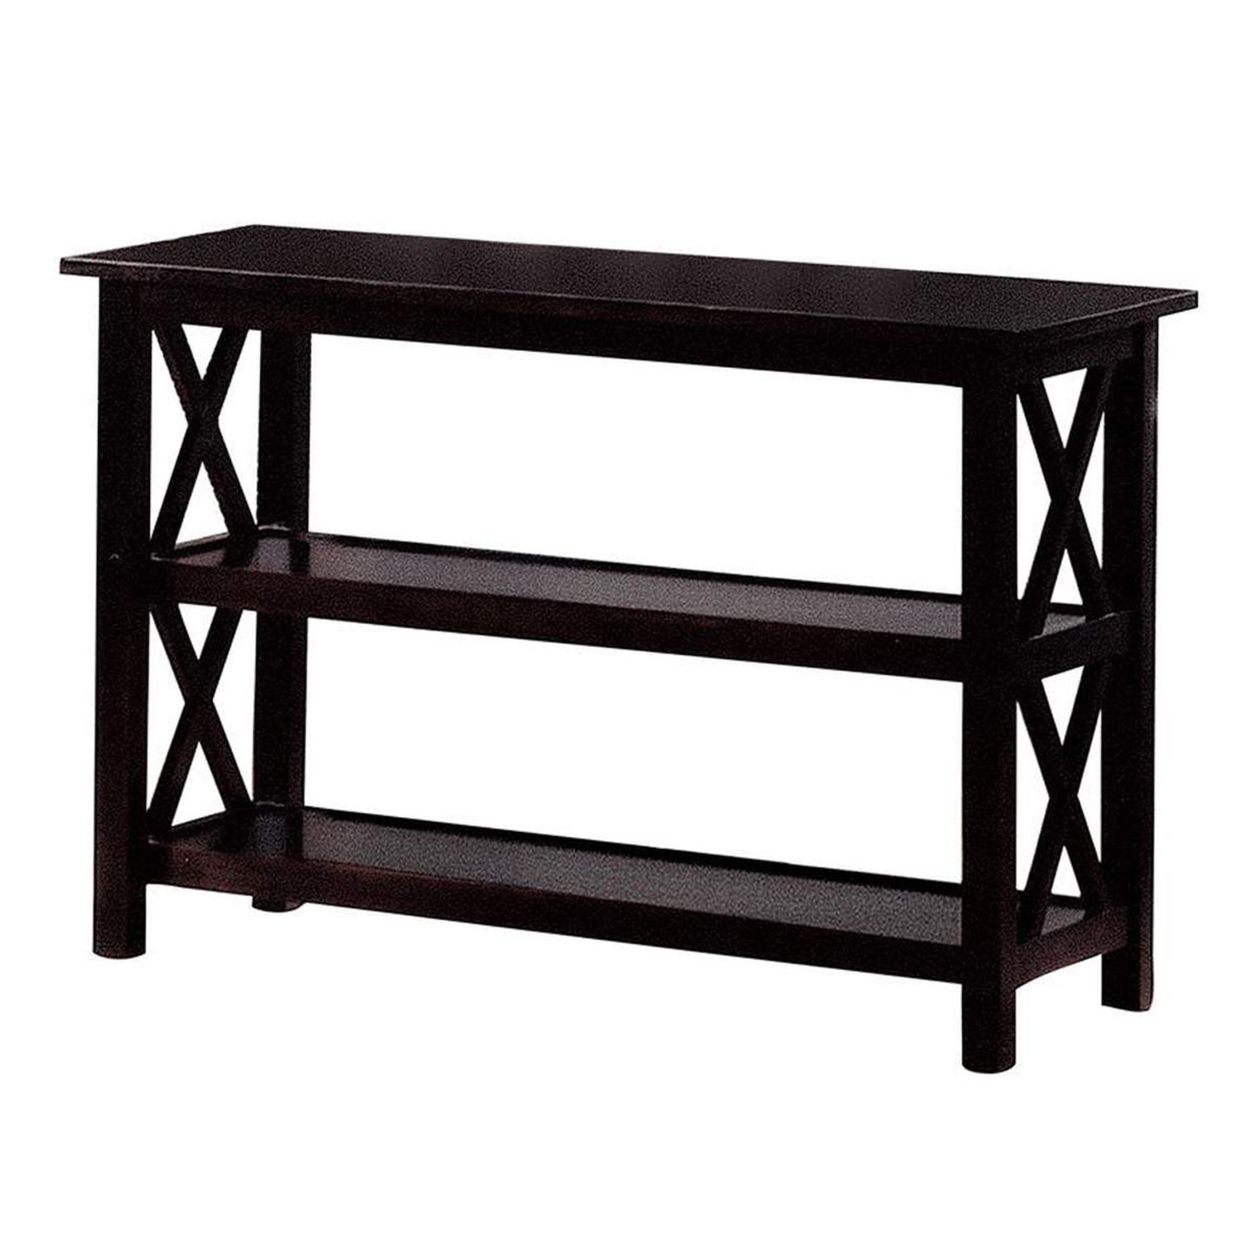 Transitional Wooden Sofa Table With X Side Design & Two Shelves, Dark Brown- Saltoro Sherpi